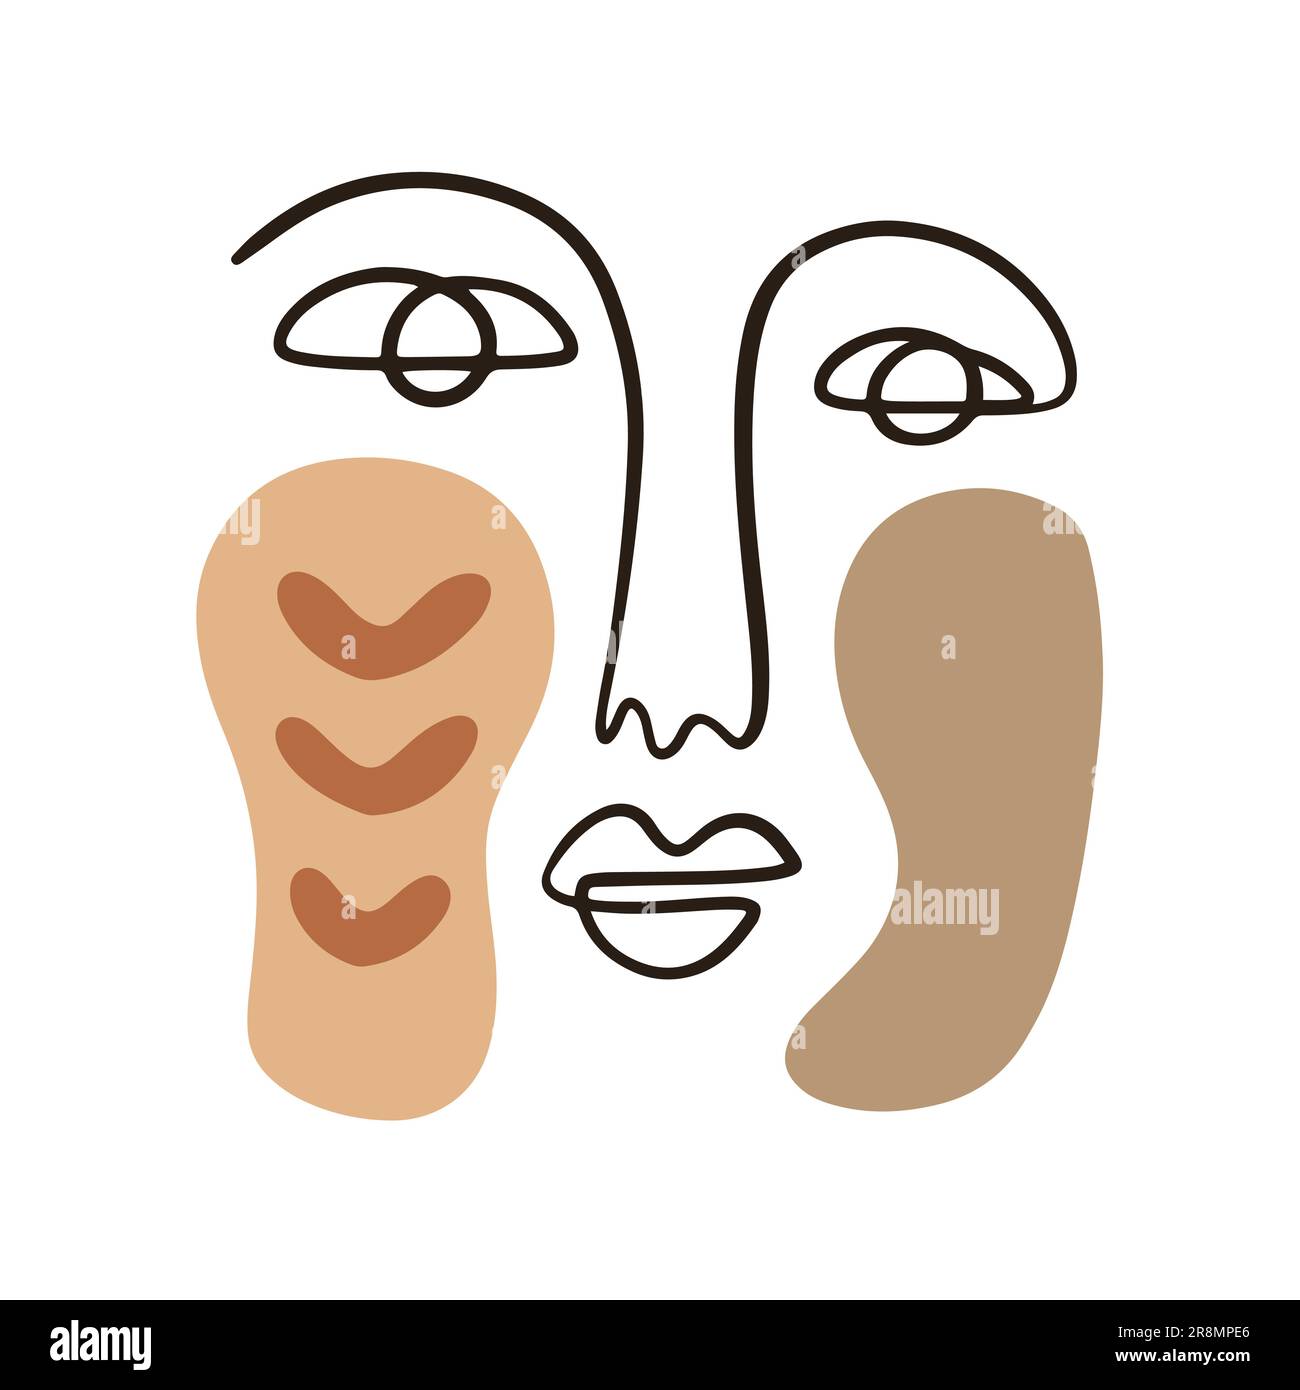 One line drawing human face with organic shapes. Stock Vector